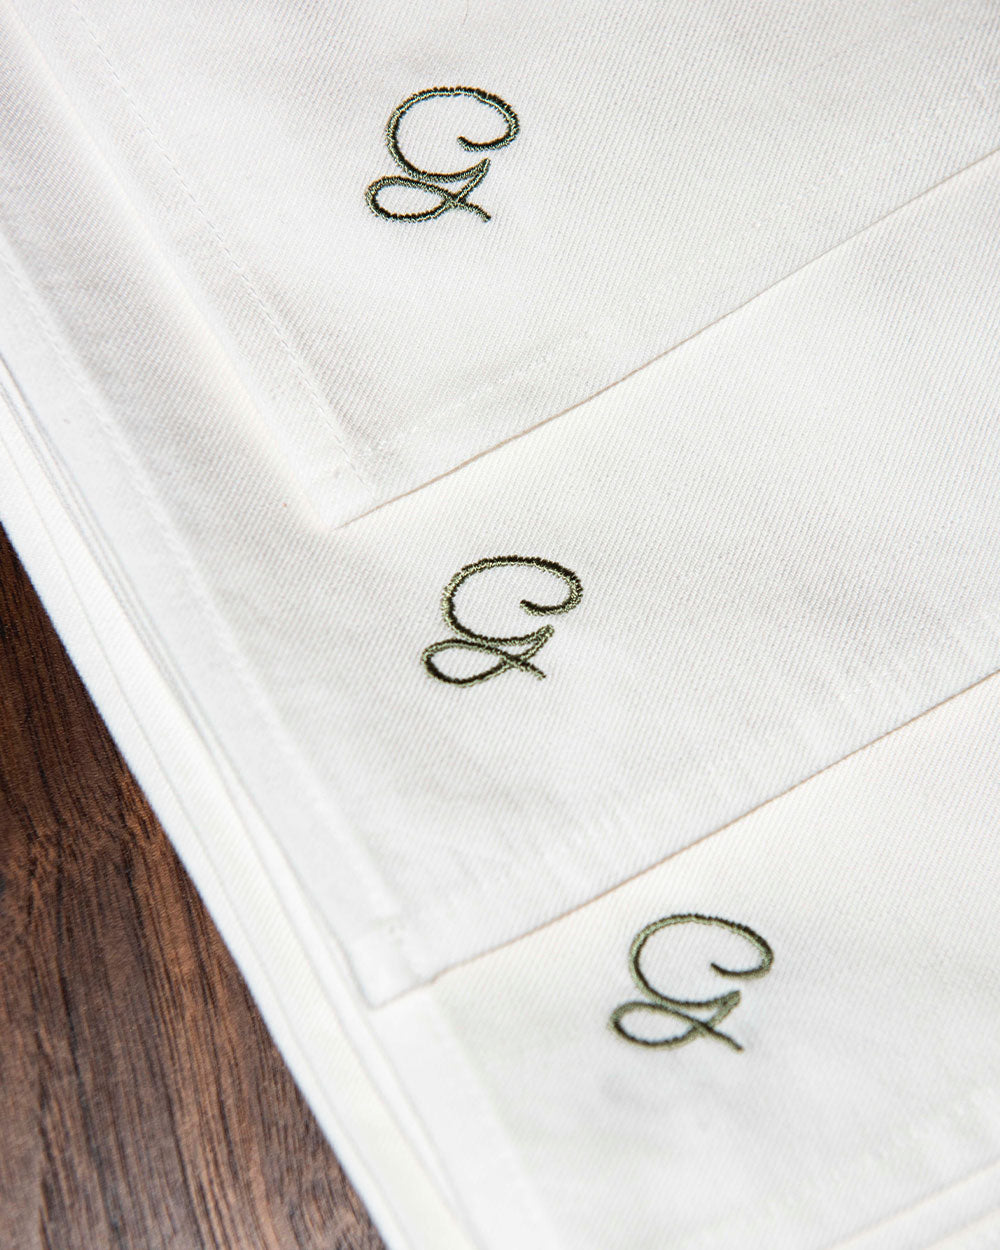 Atelier Saucier, Los Angeles-based custom cloth napkins, towels, table runners, cocktail sets and more! Custom monogramming.